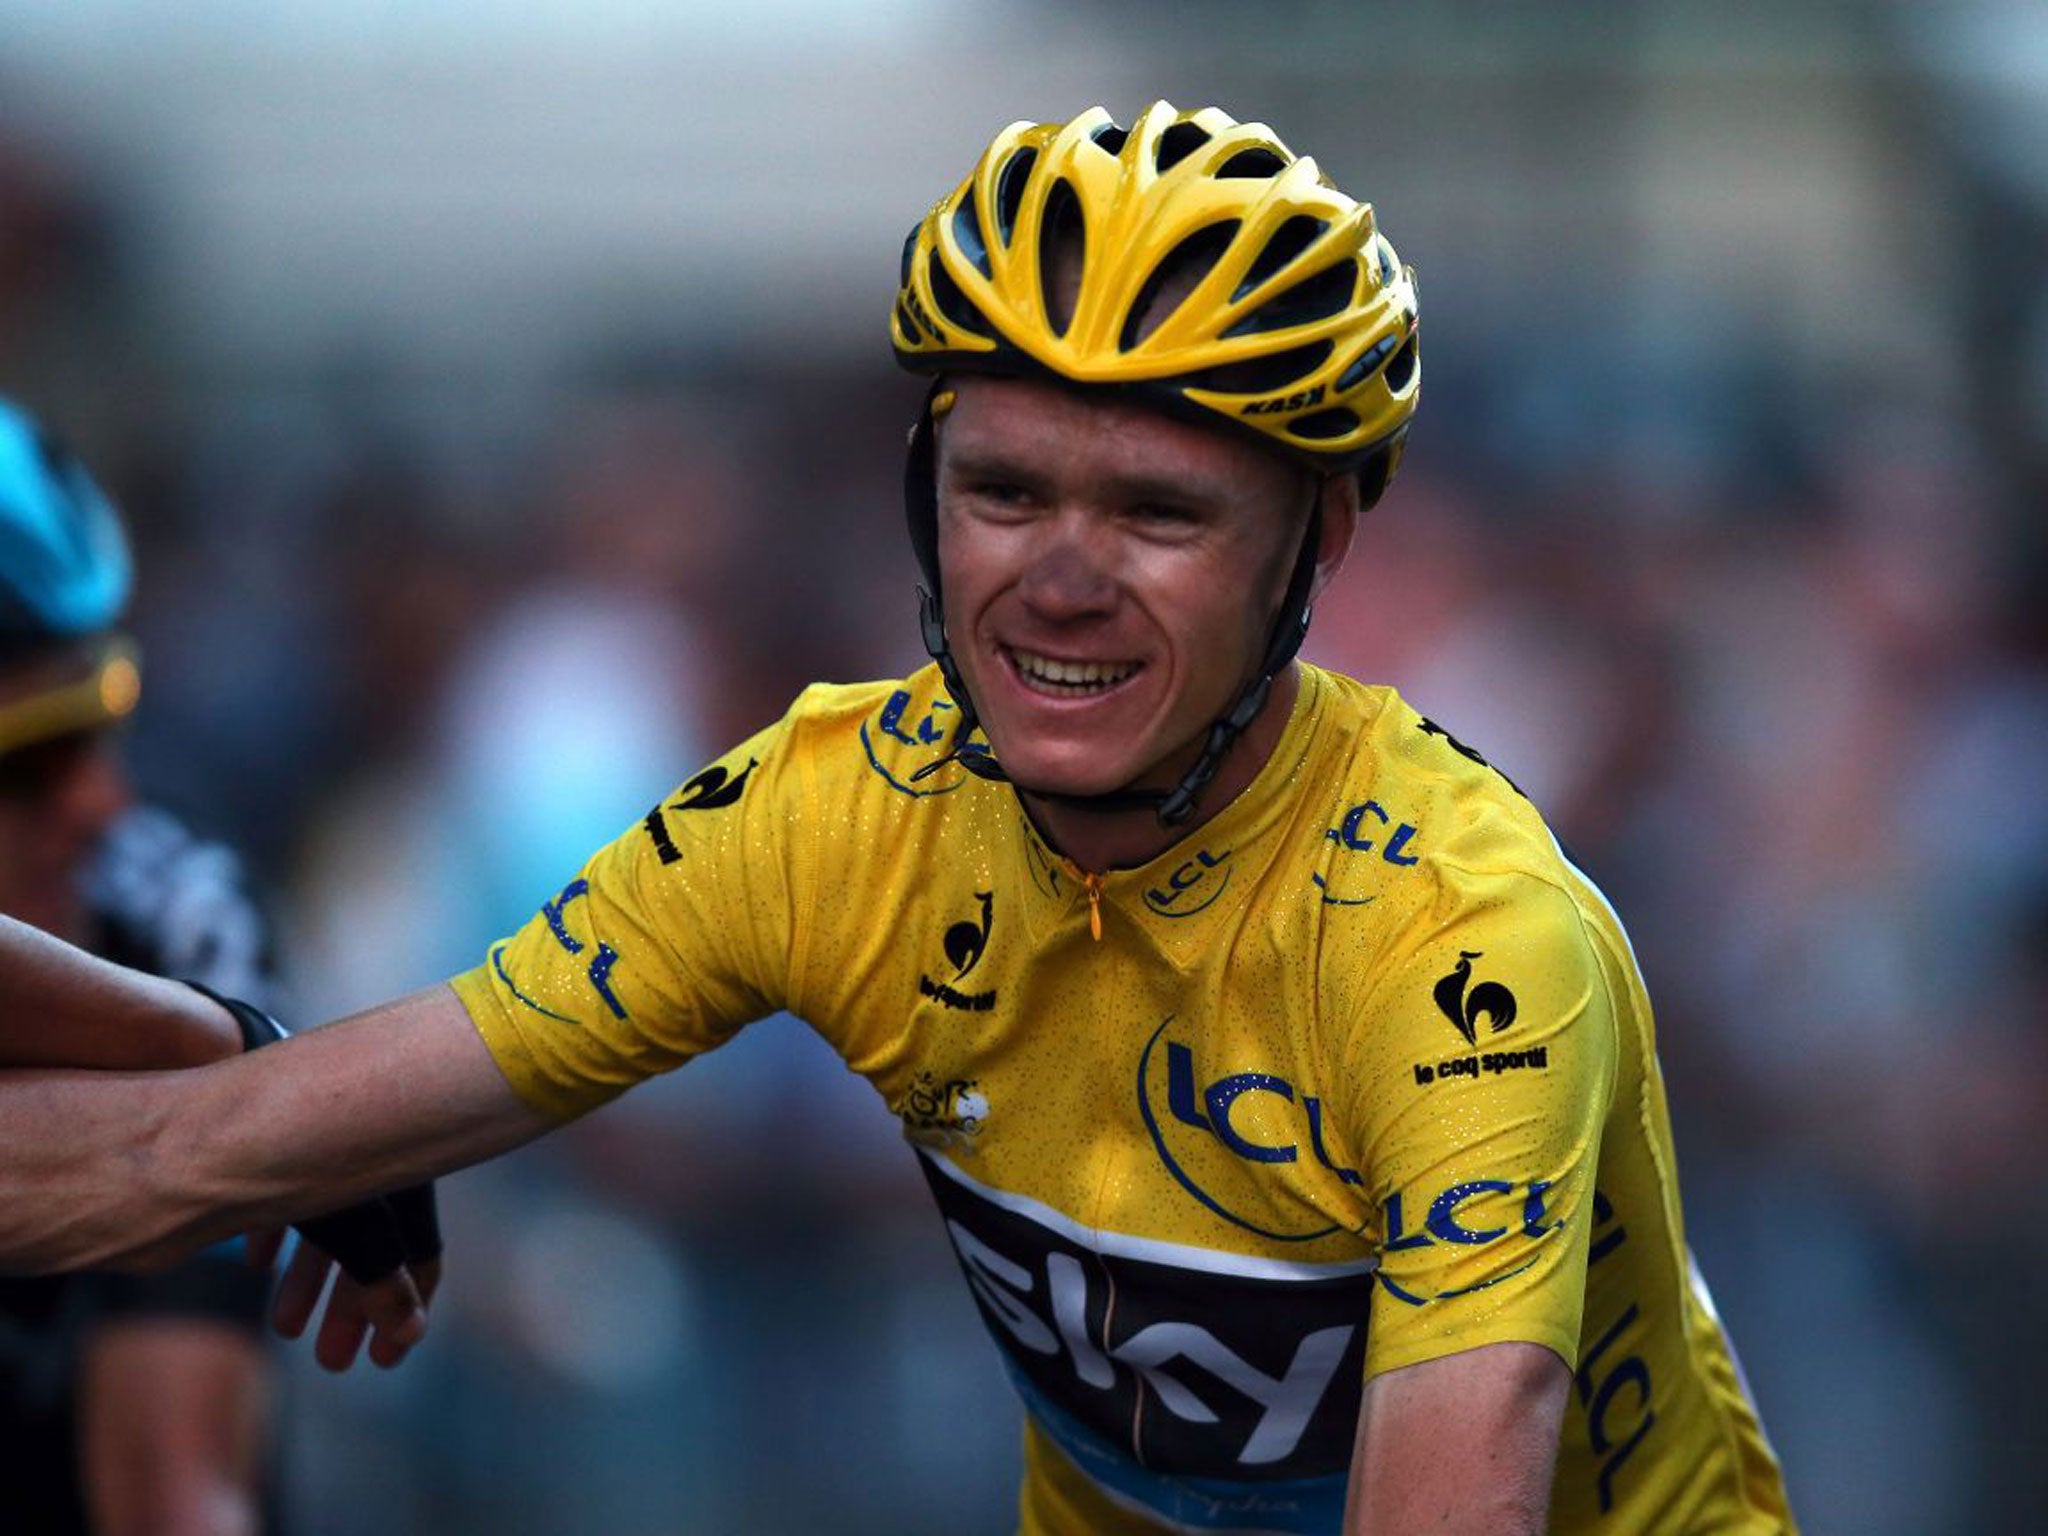 Tour de France winner Chris Froome signs new contract with Team Sky